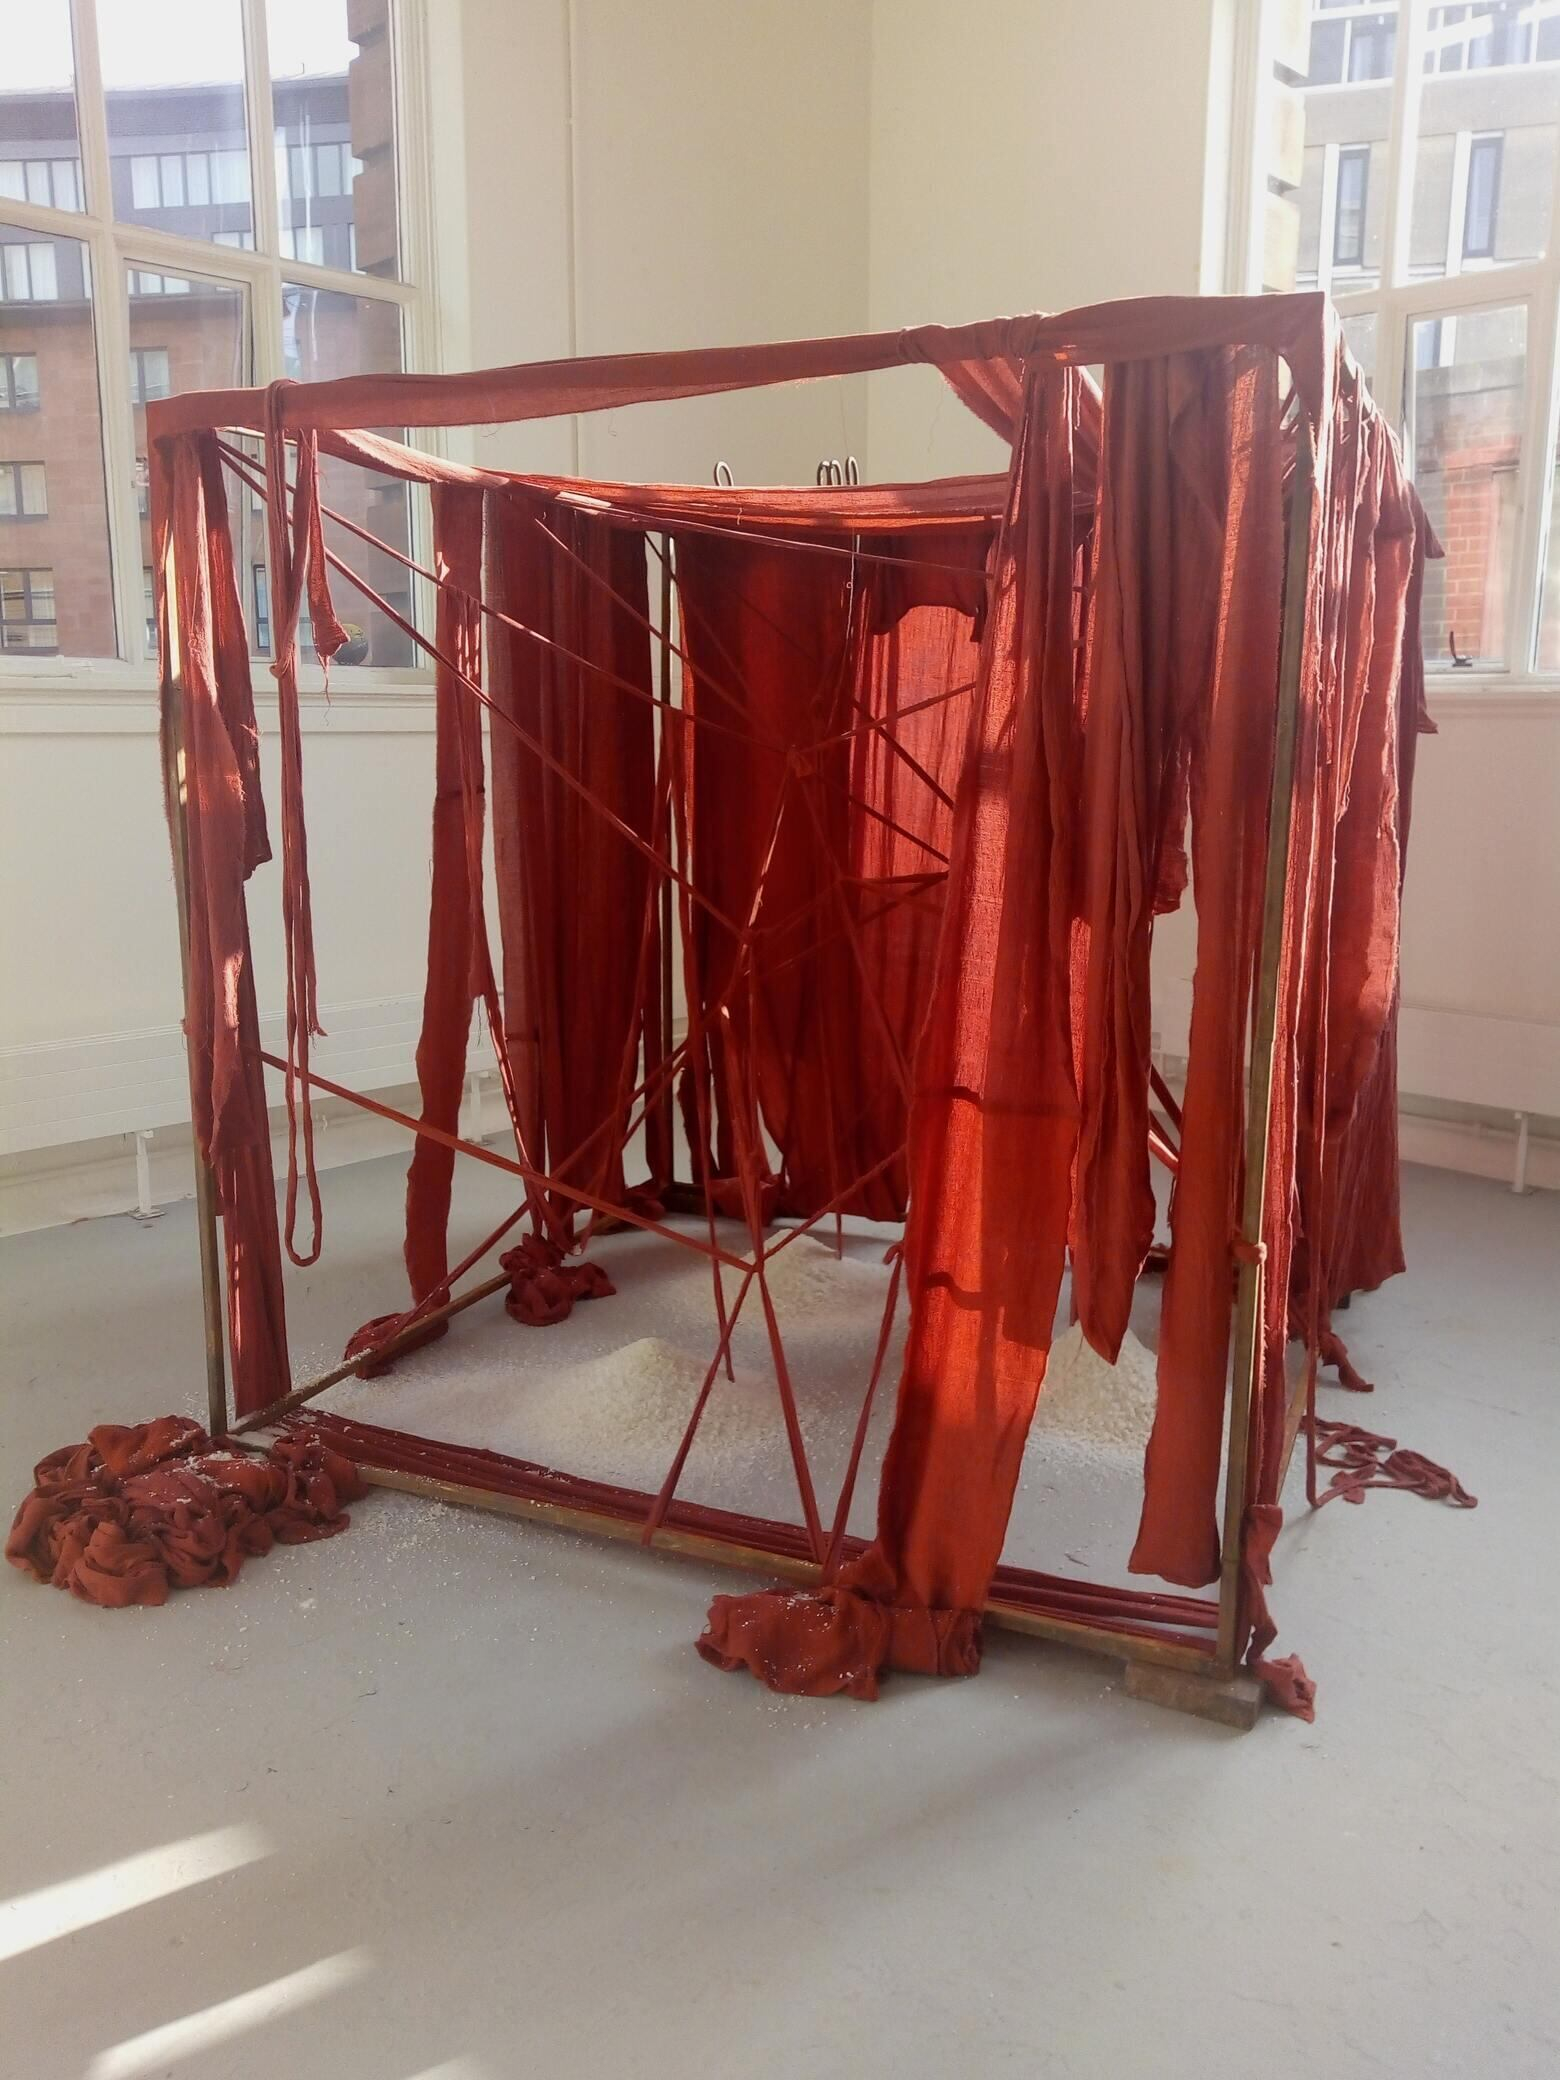 A 2 metre by 2 metre rusted steel frame with internal structure of red fabric criss-crossed and draped and wound with red fabric bandages. There are 3 piles of salt within the structure and 4 upstanding metal hooks at the rear and to the left.